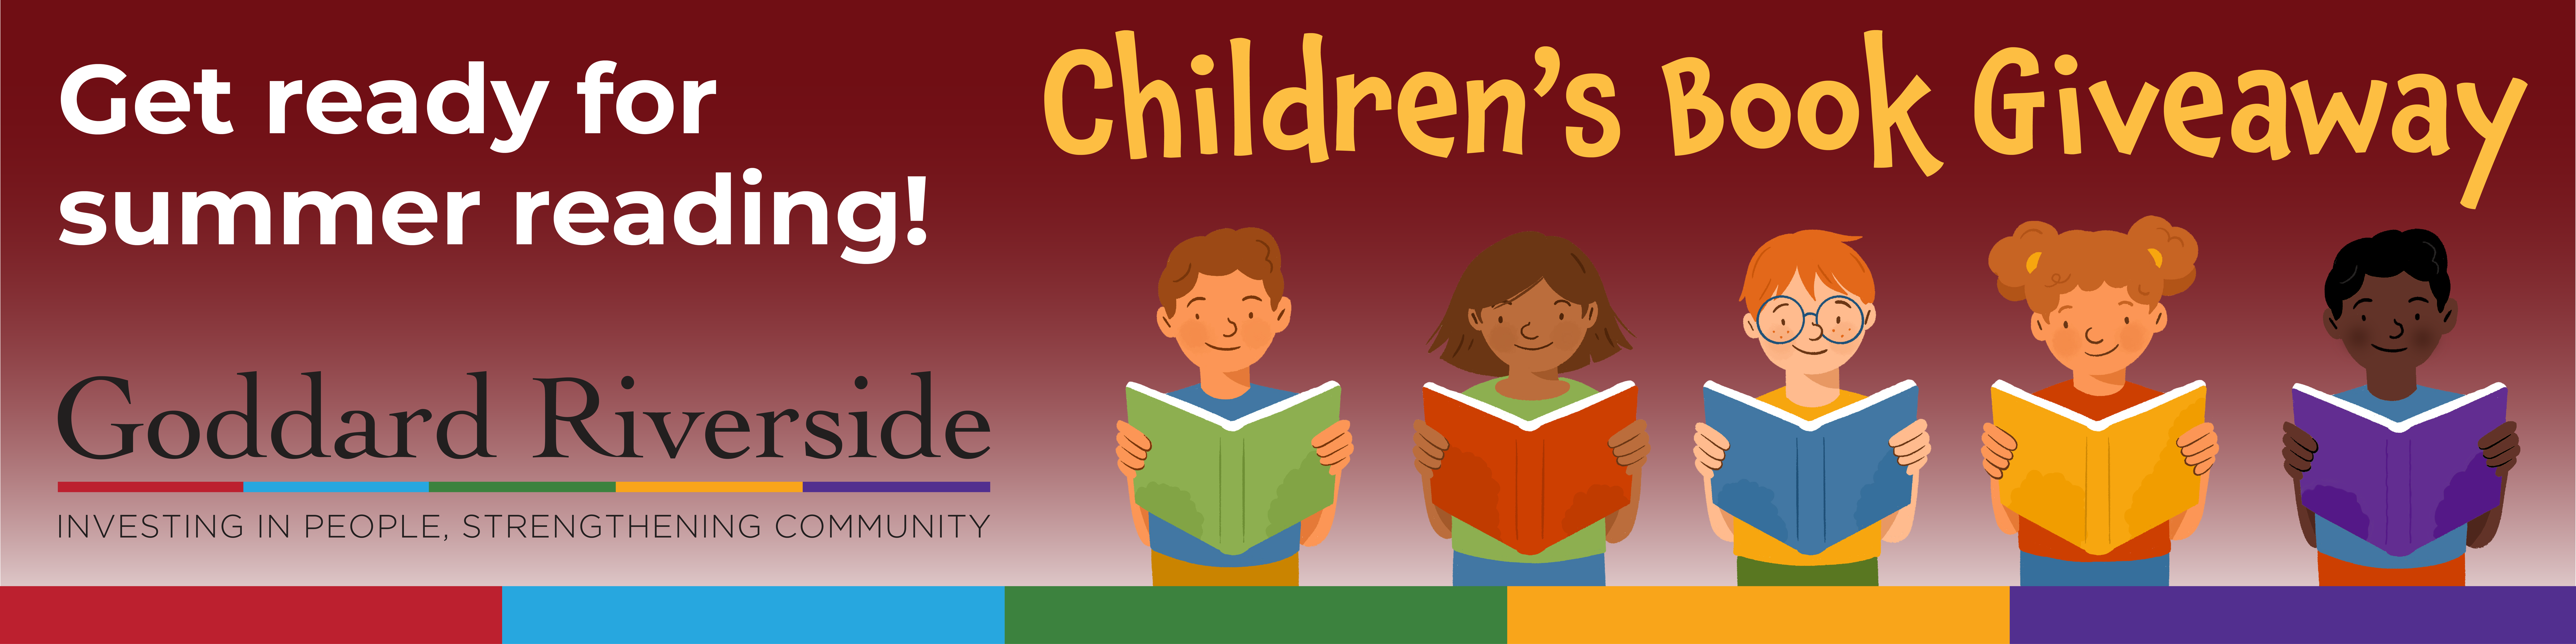 Children's book Giveaway. Get ready for summer reading! Goddard Logo and graphic of 5 children holding books.